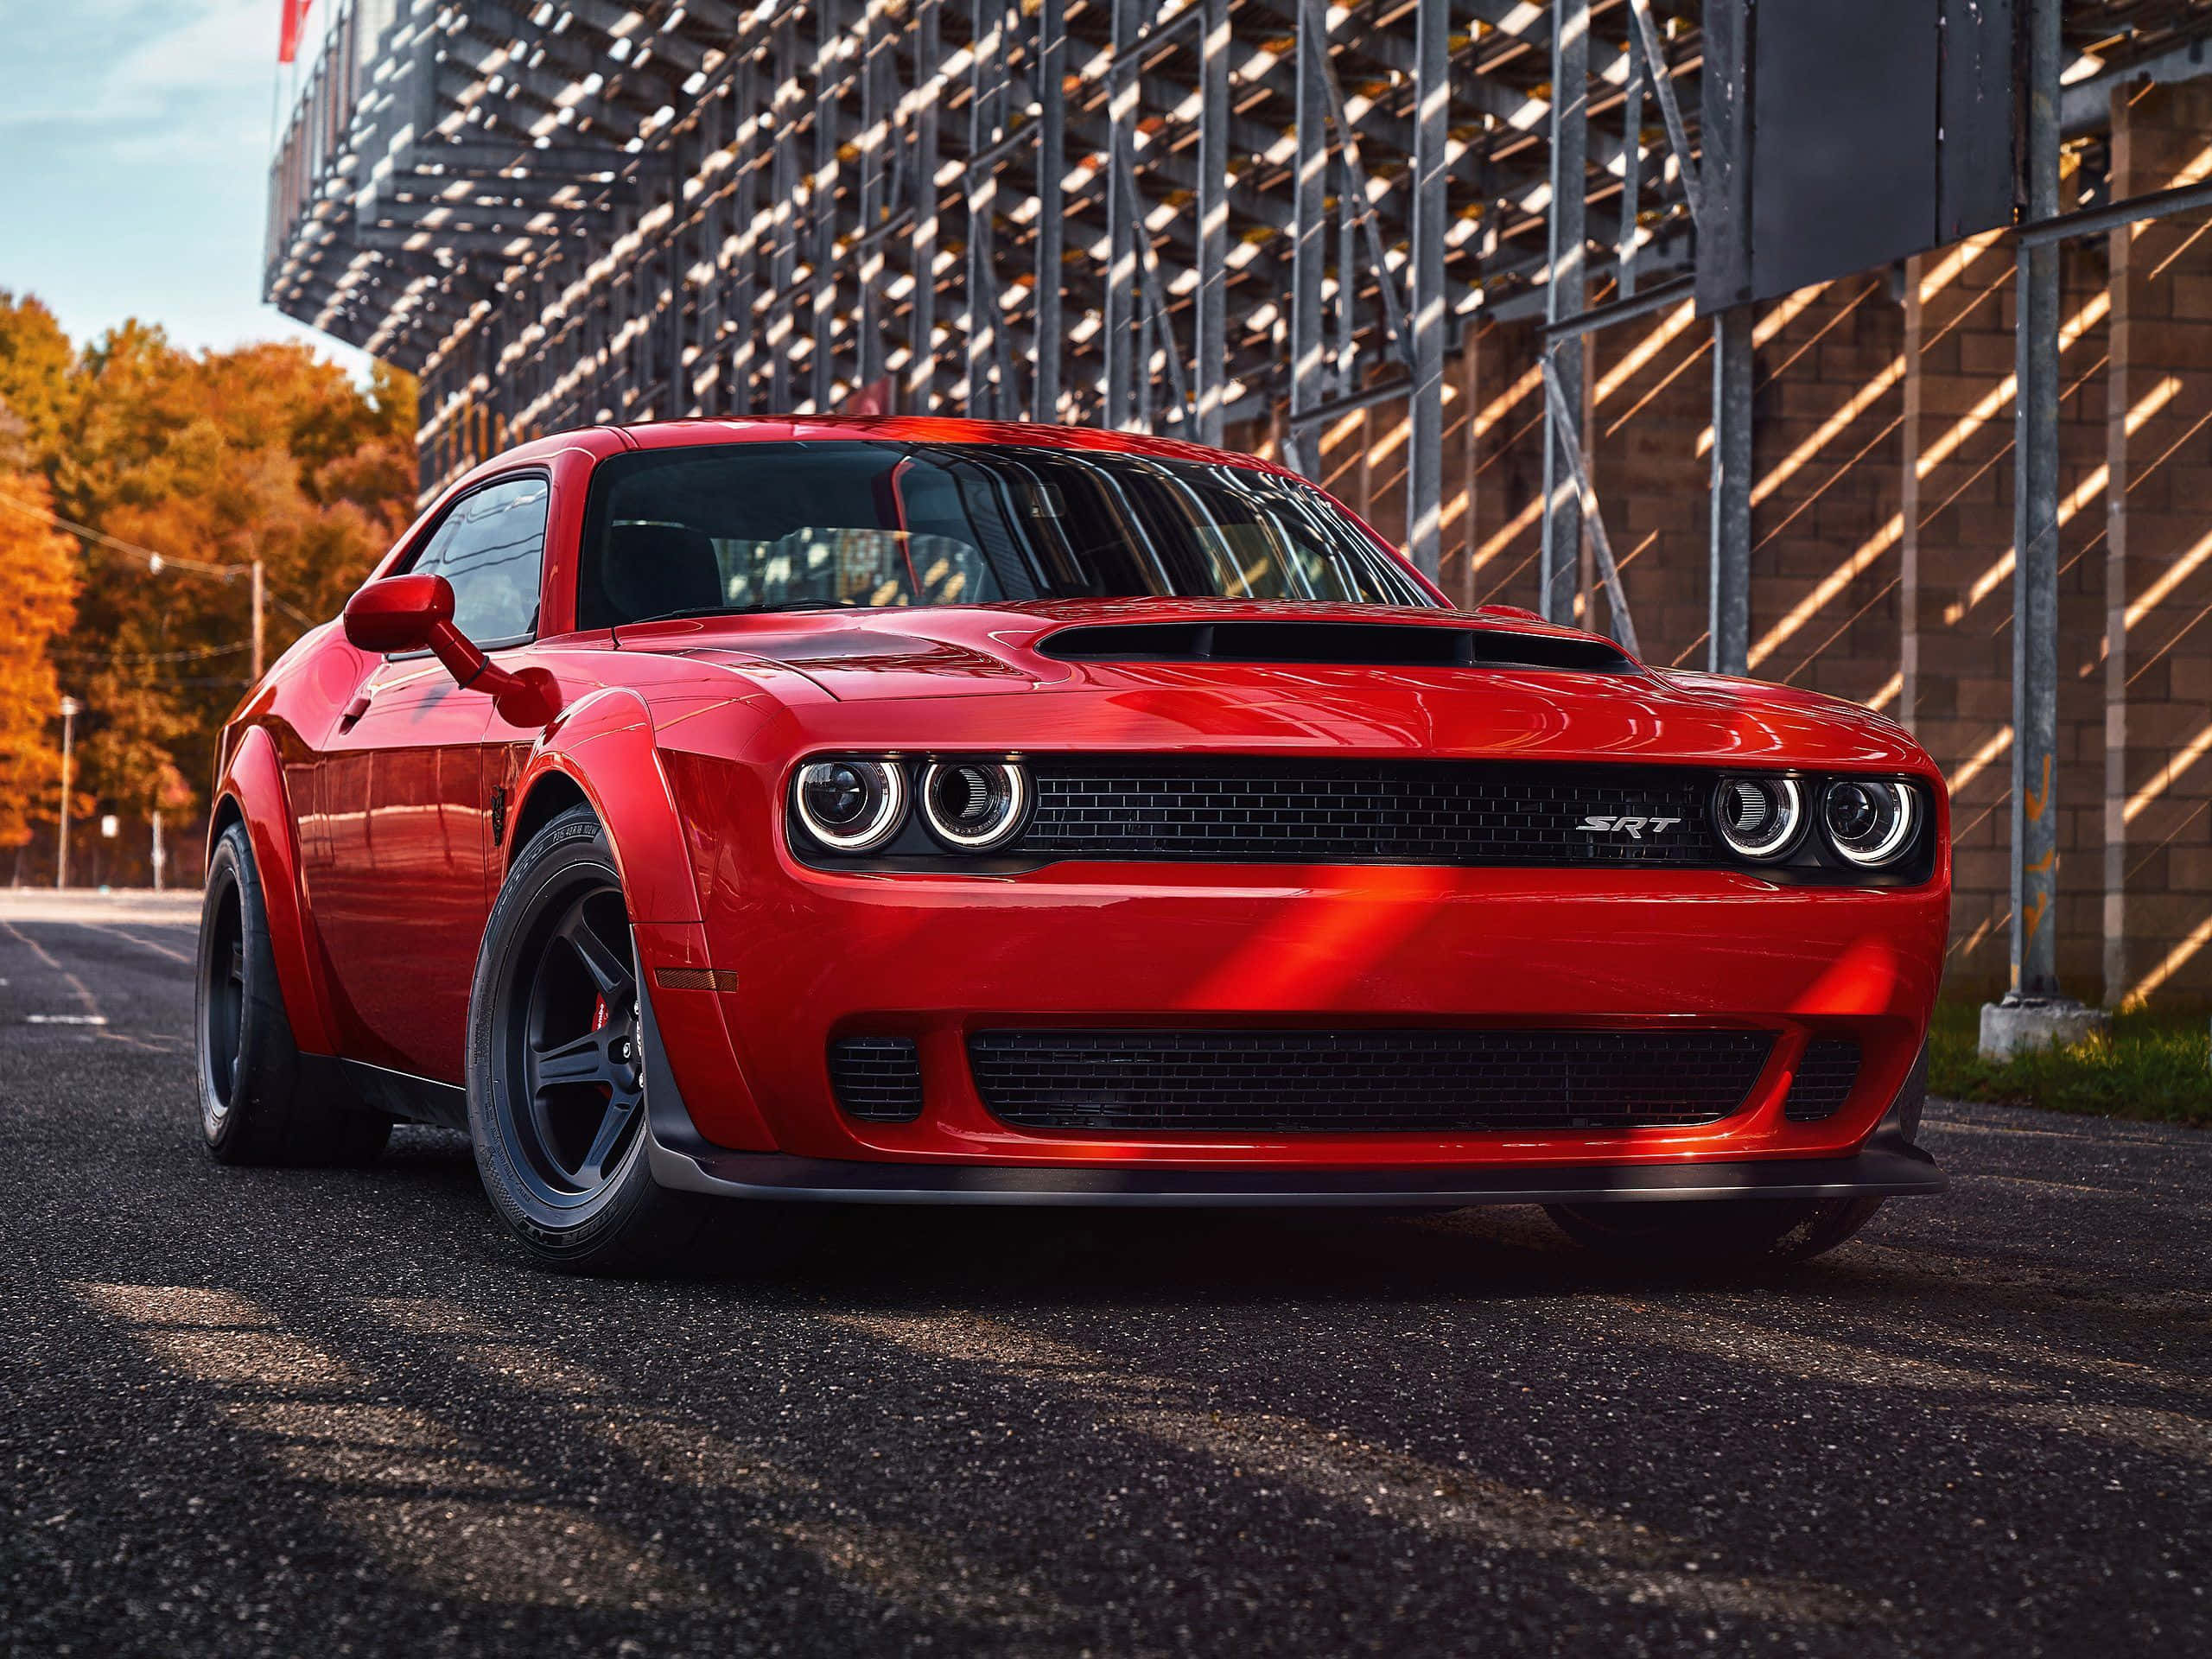 "The Unstoppable Force - Dodge Hellcat" Wallpaper